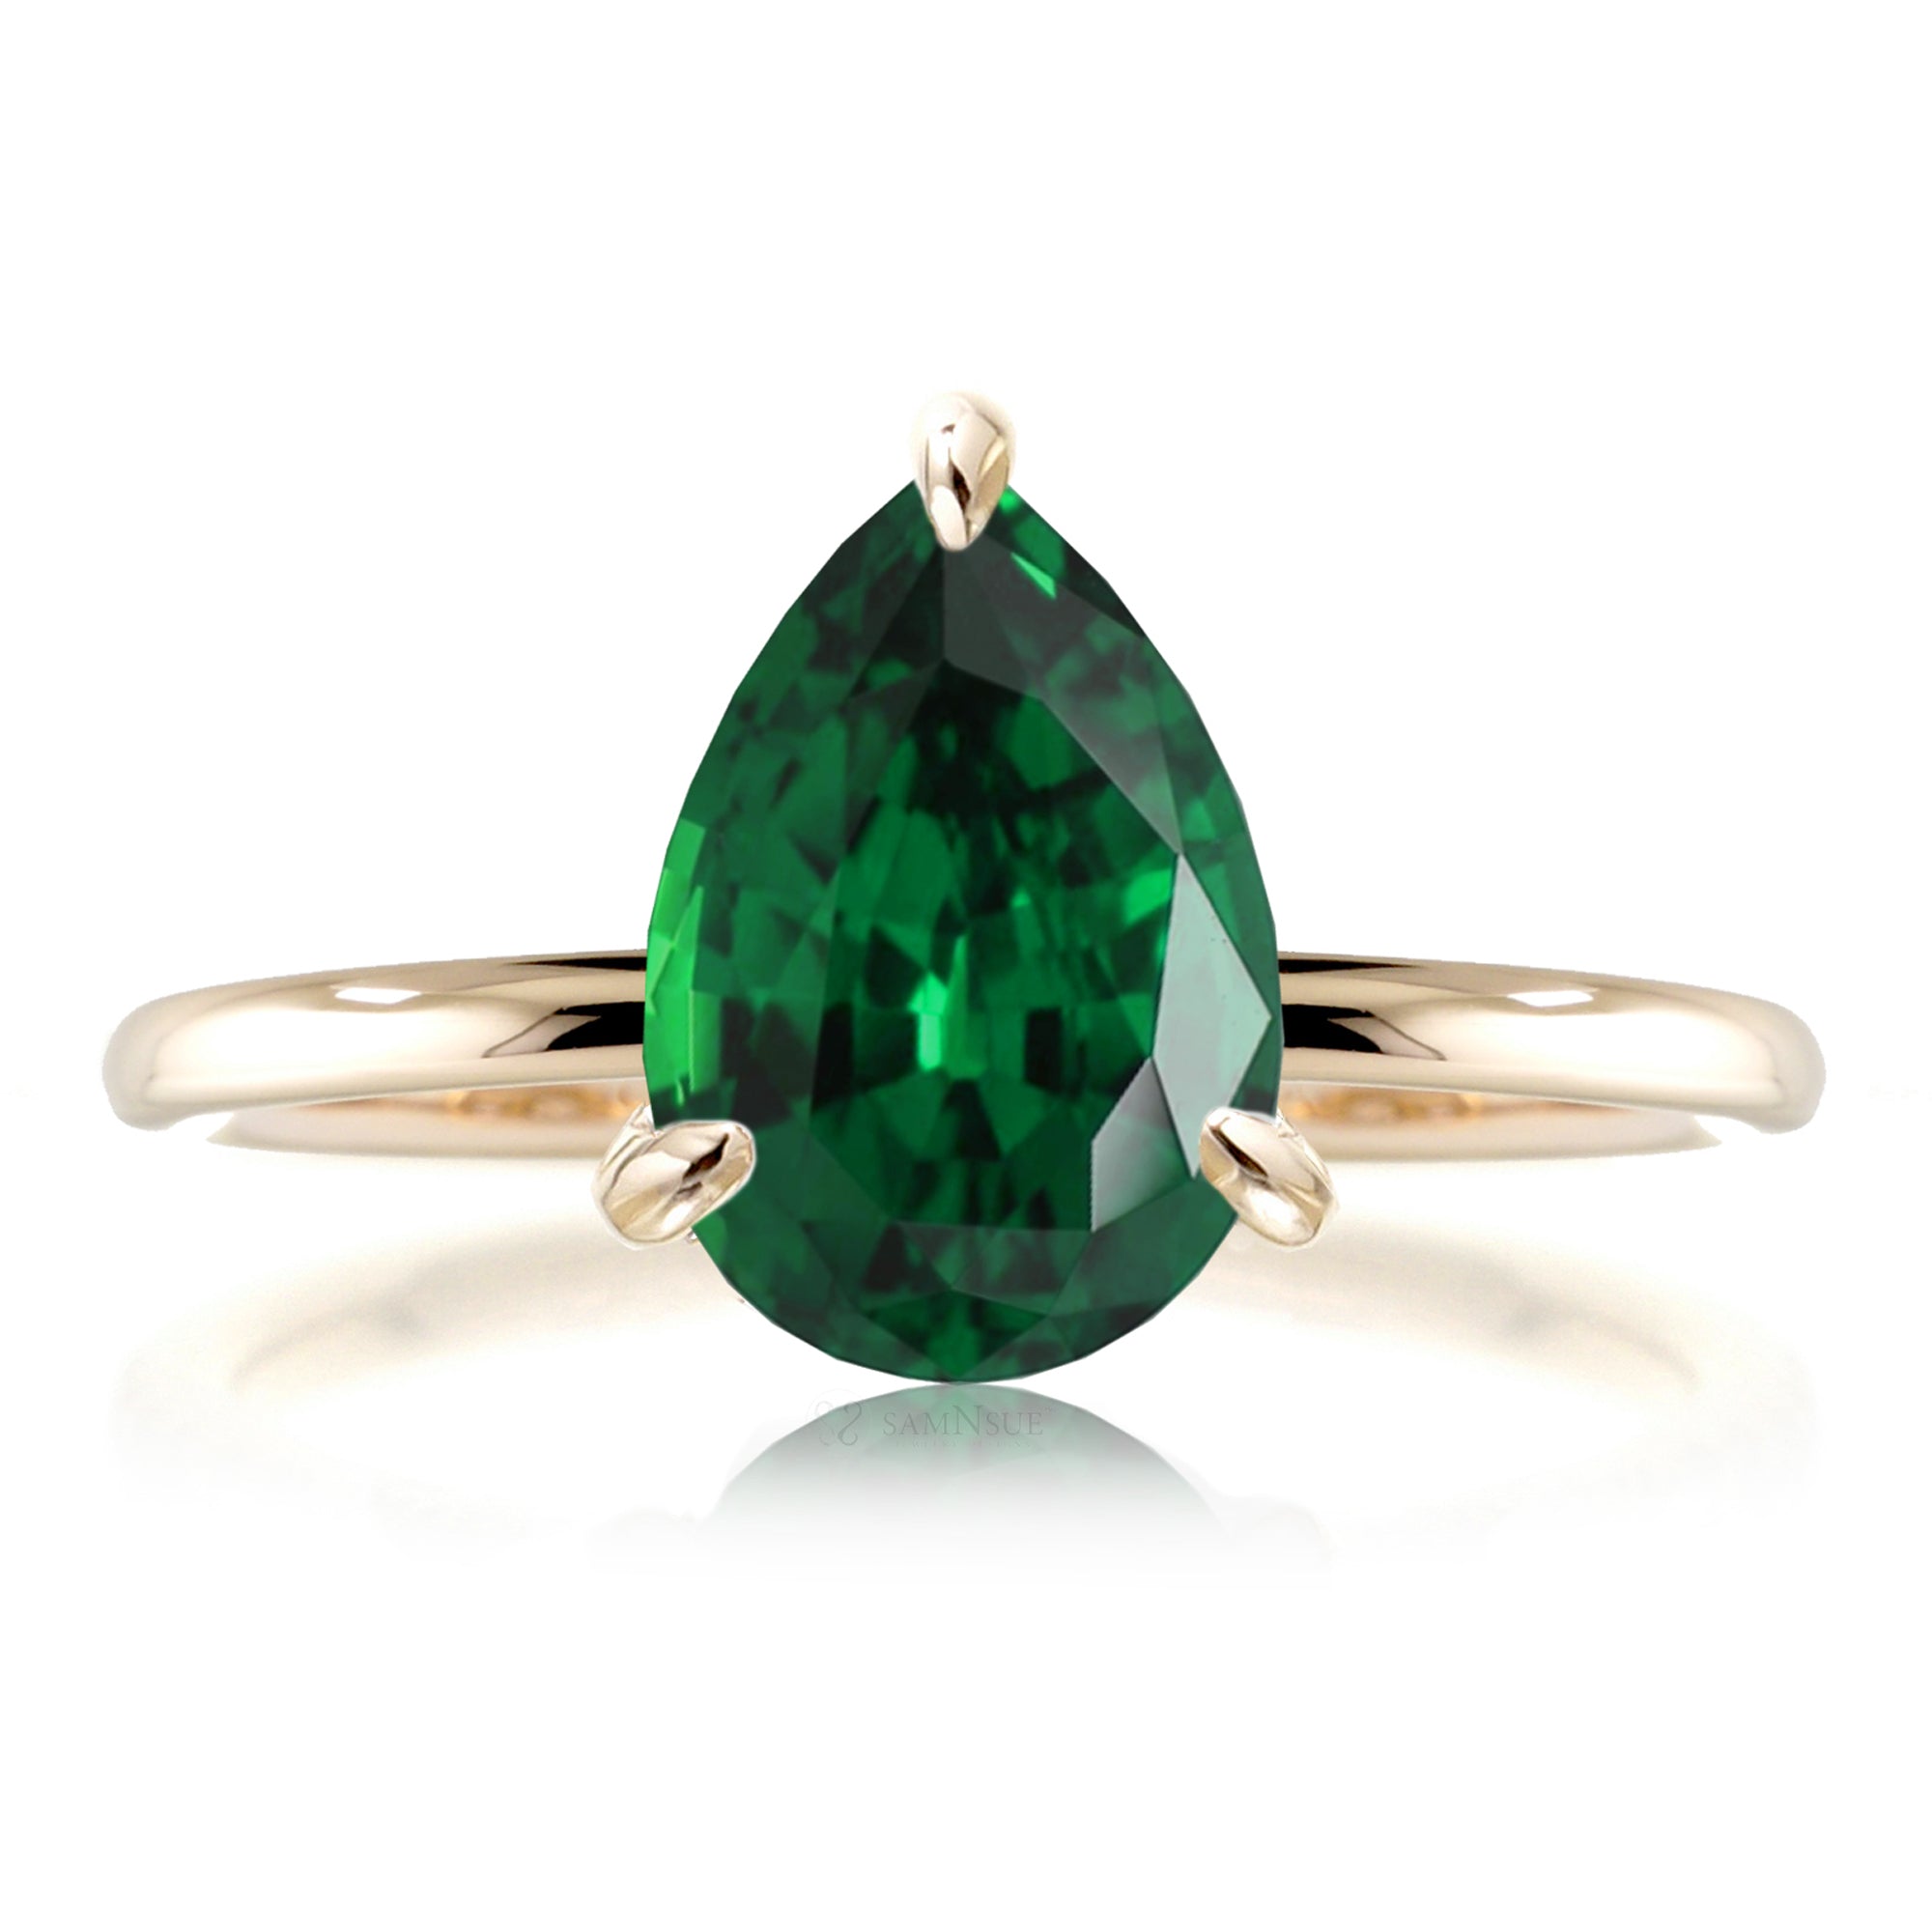 Pear green emerald solid band engagement ring yellow gold - the Ava